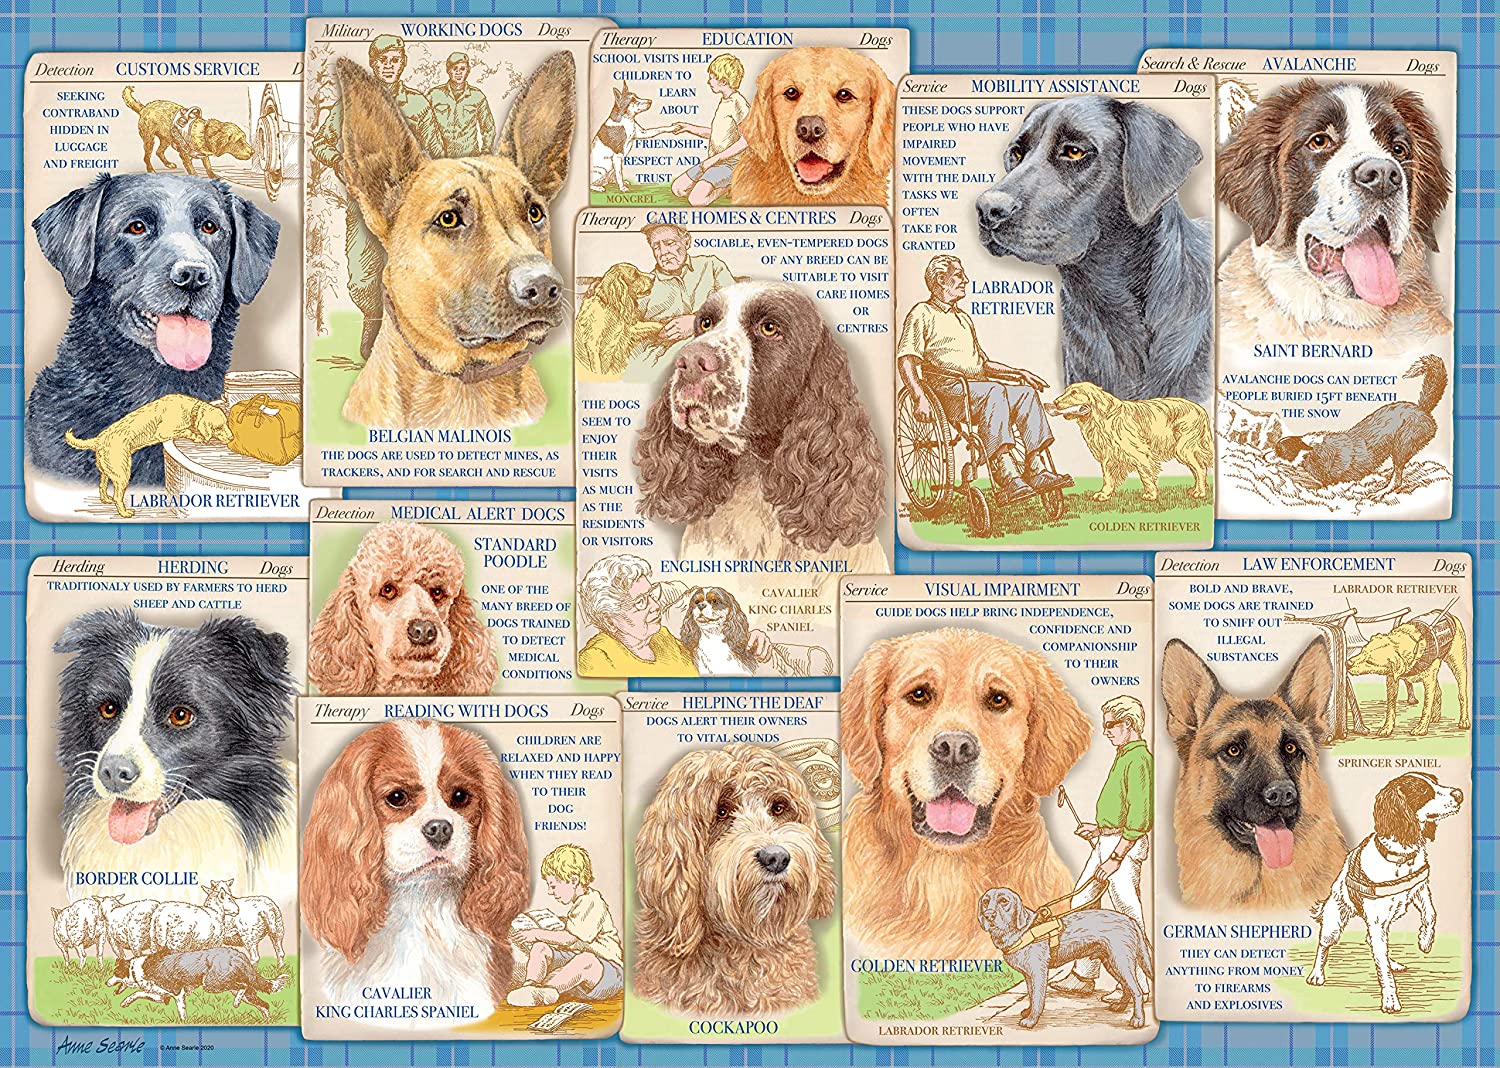 Puppy Pals, Adult Puzzles, Jigsaw Puzzles, Products